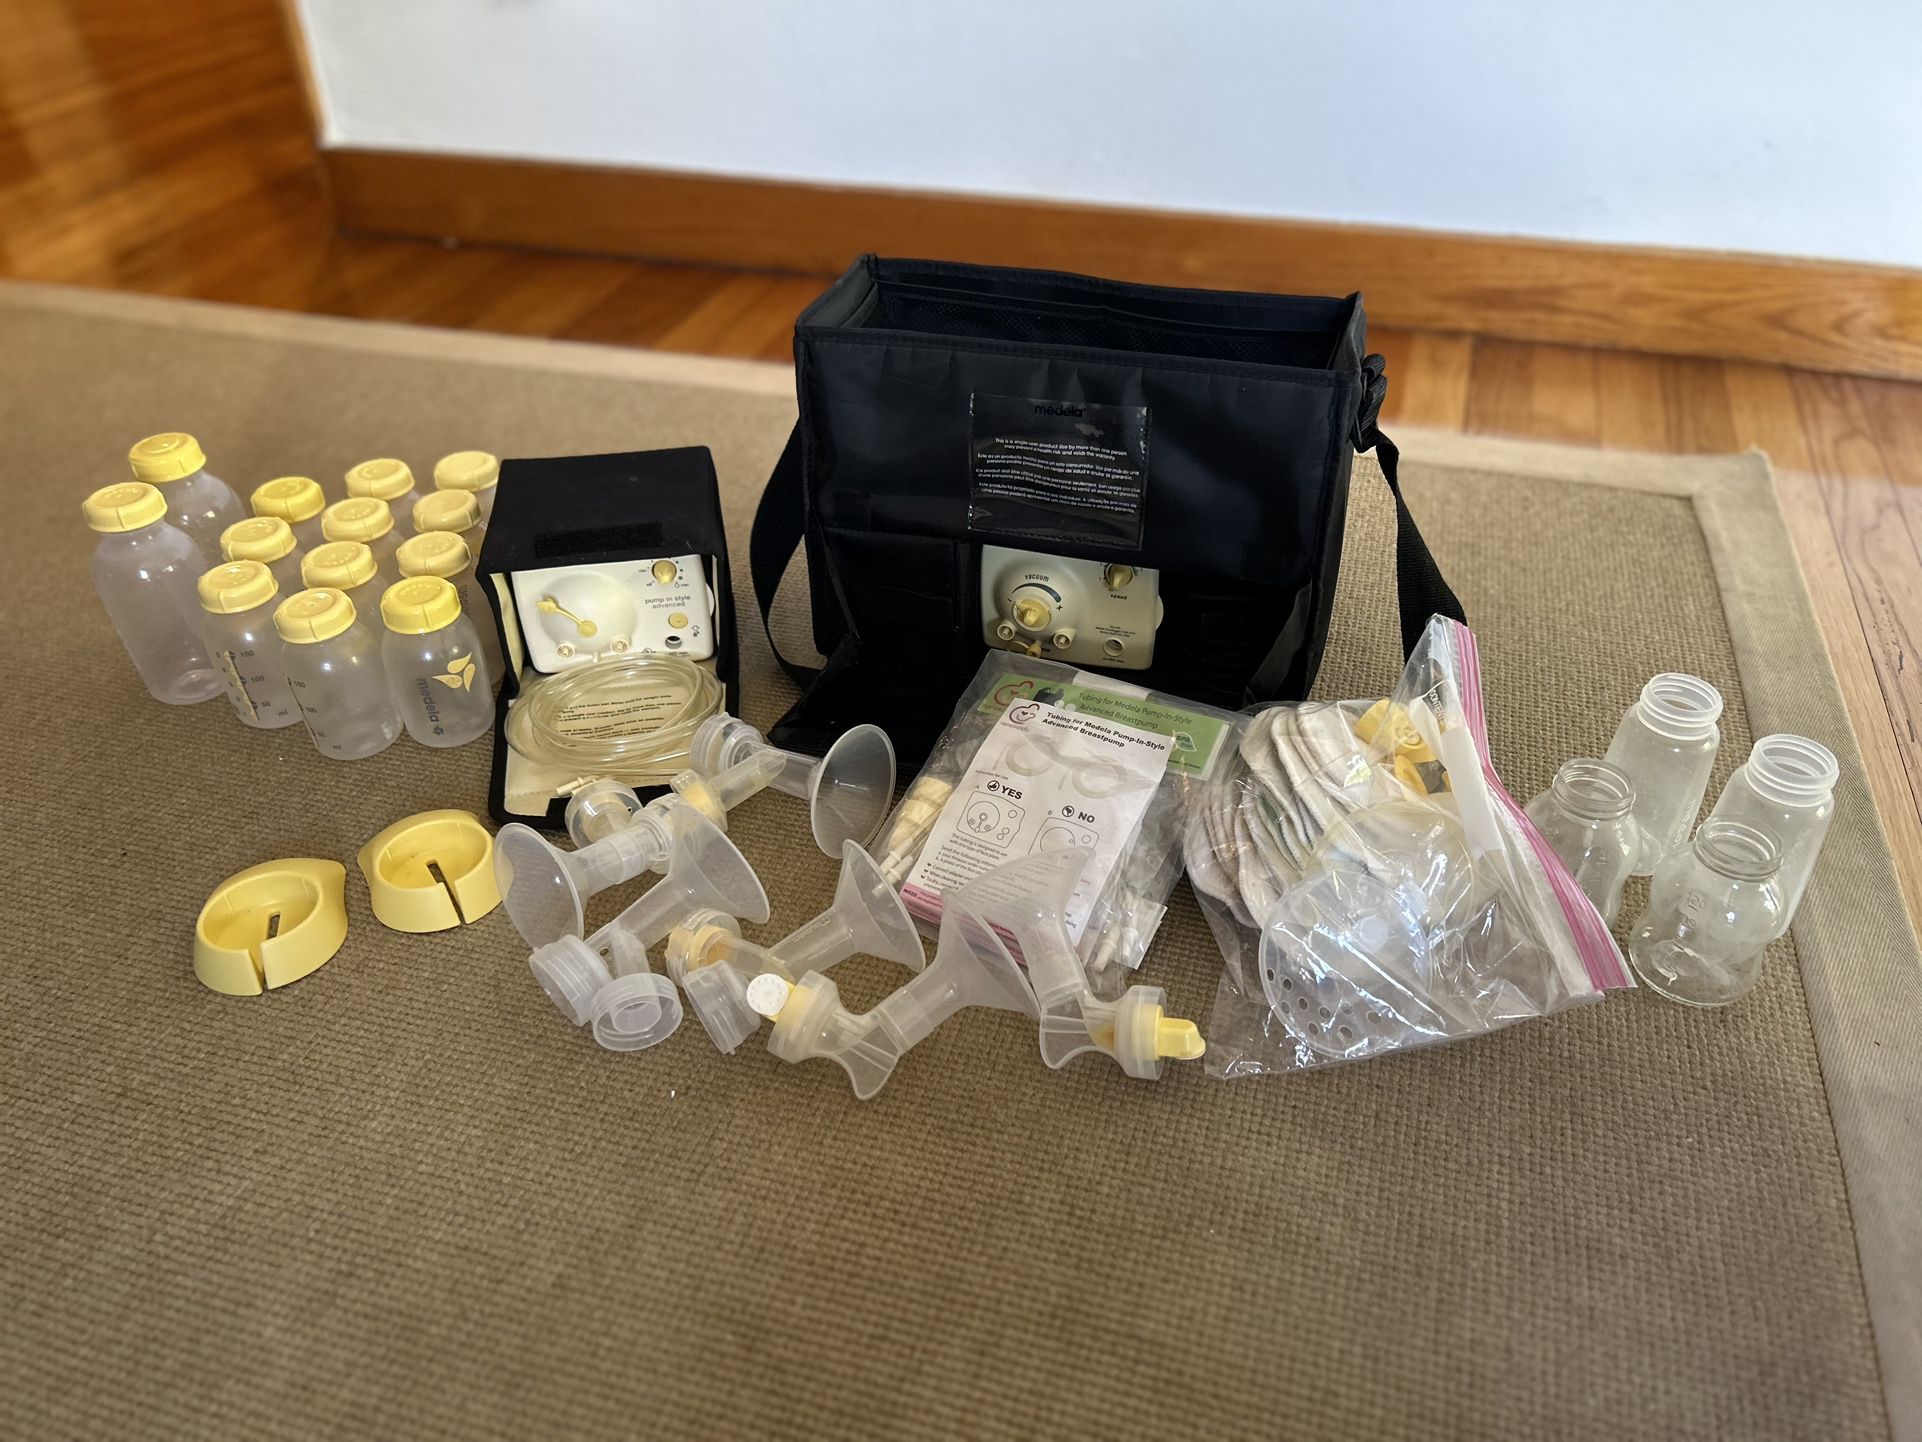 2 Medela Pump In Style Breast Pumps With Extras